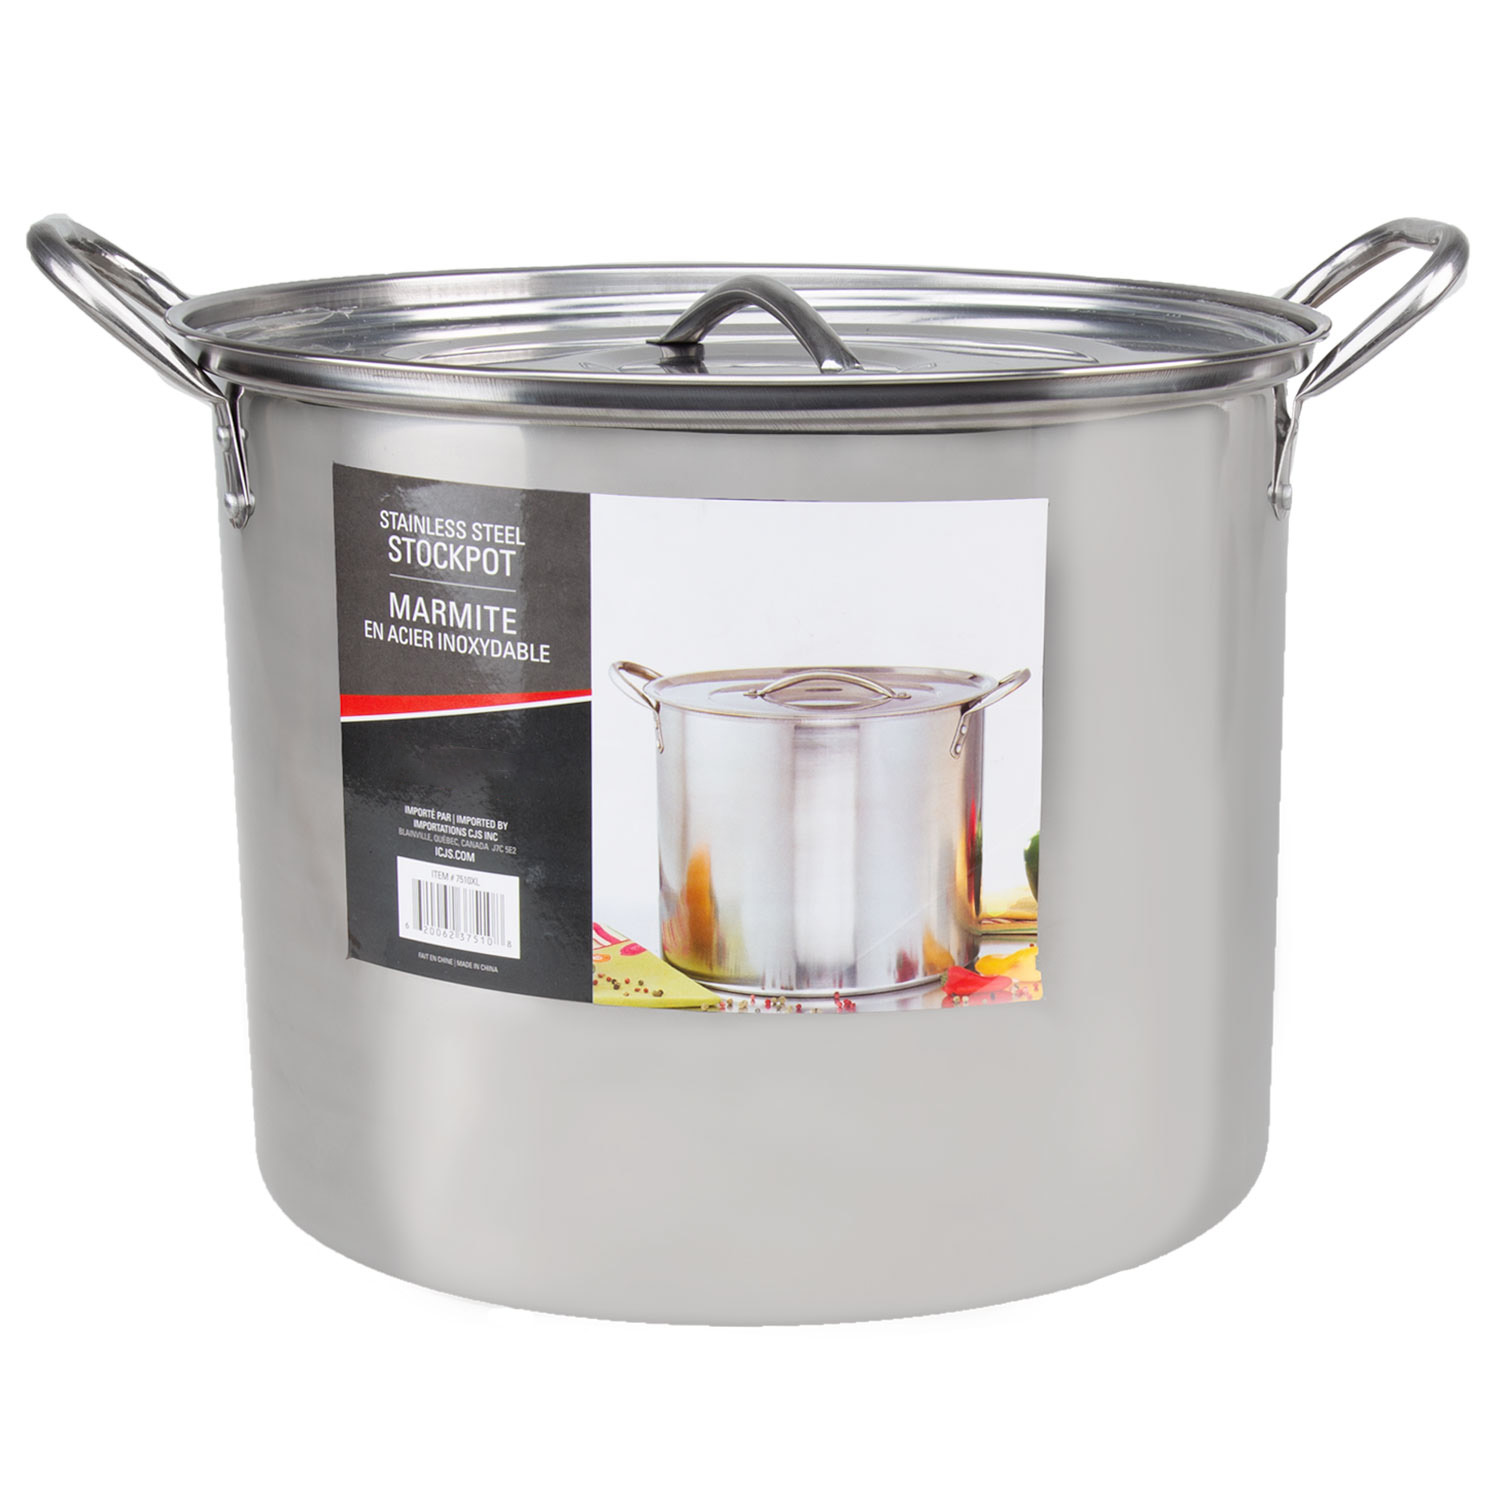 Stainless steel stockpot 5.8L